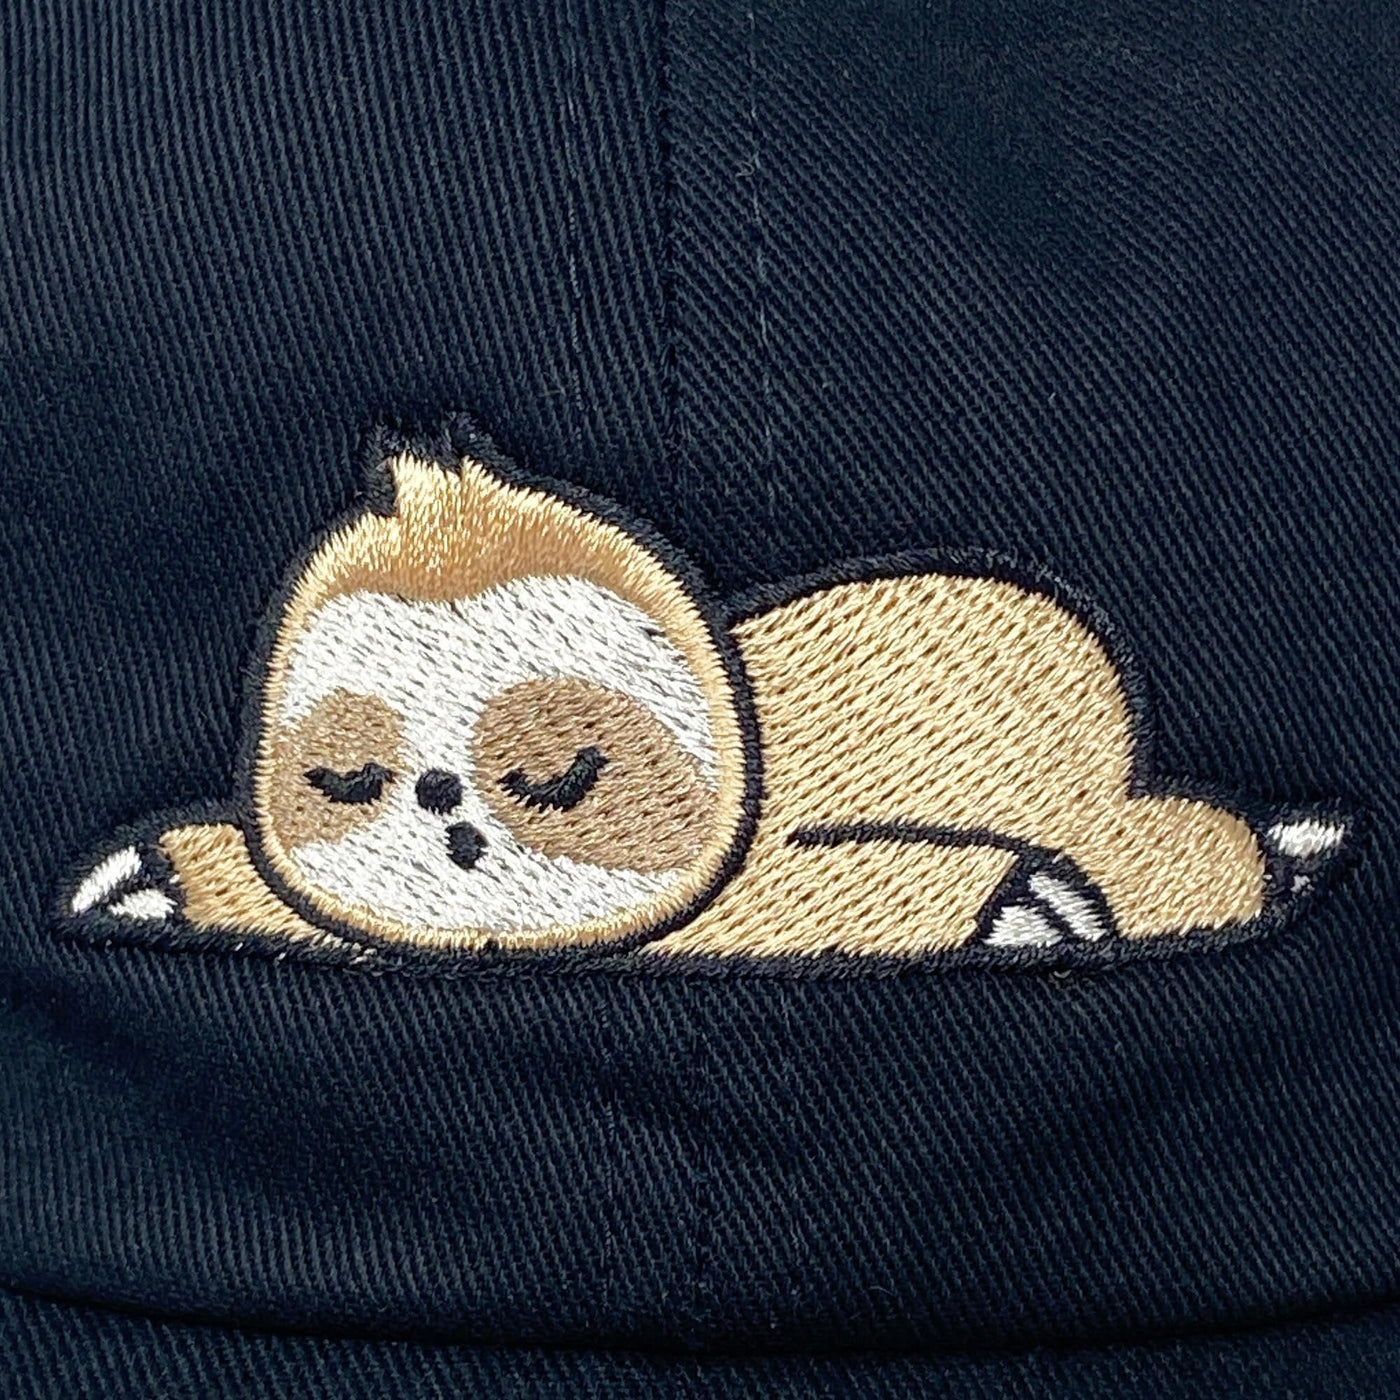 707 Street Furry Friends Embroidered Baseball Dad Hat - Sleeping Sloth